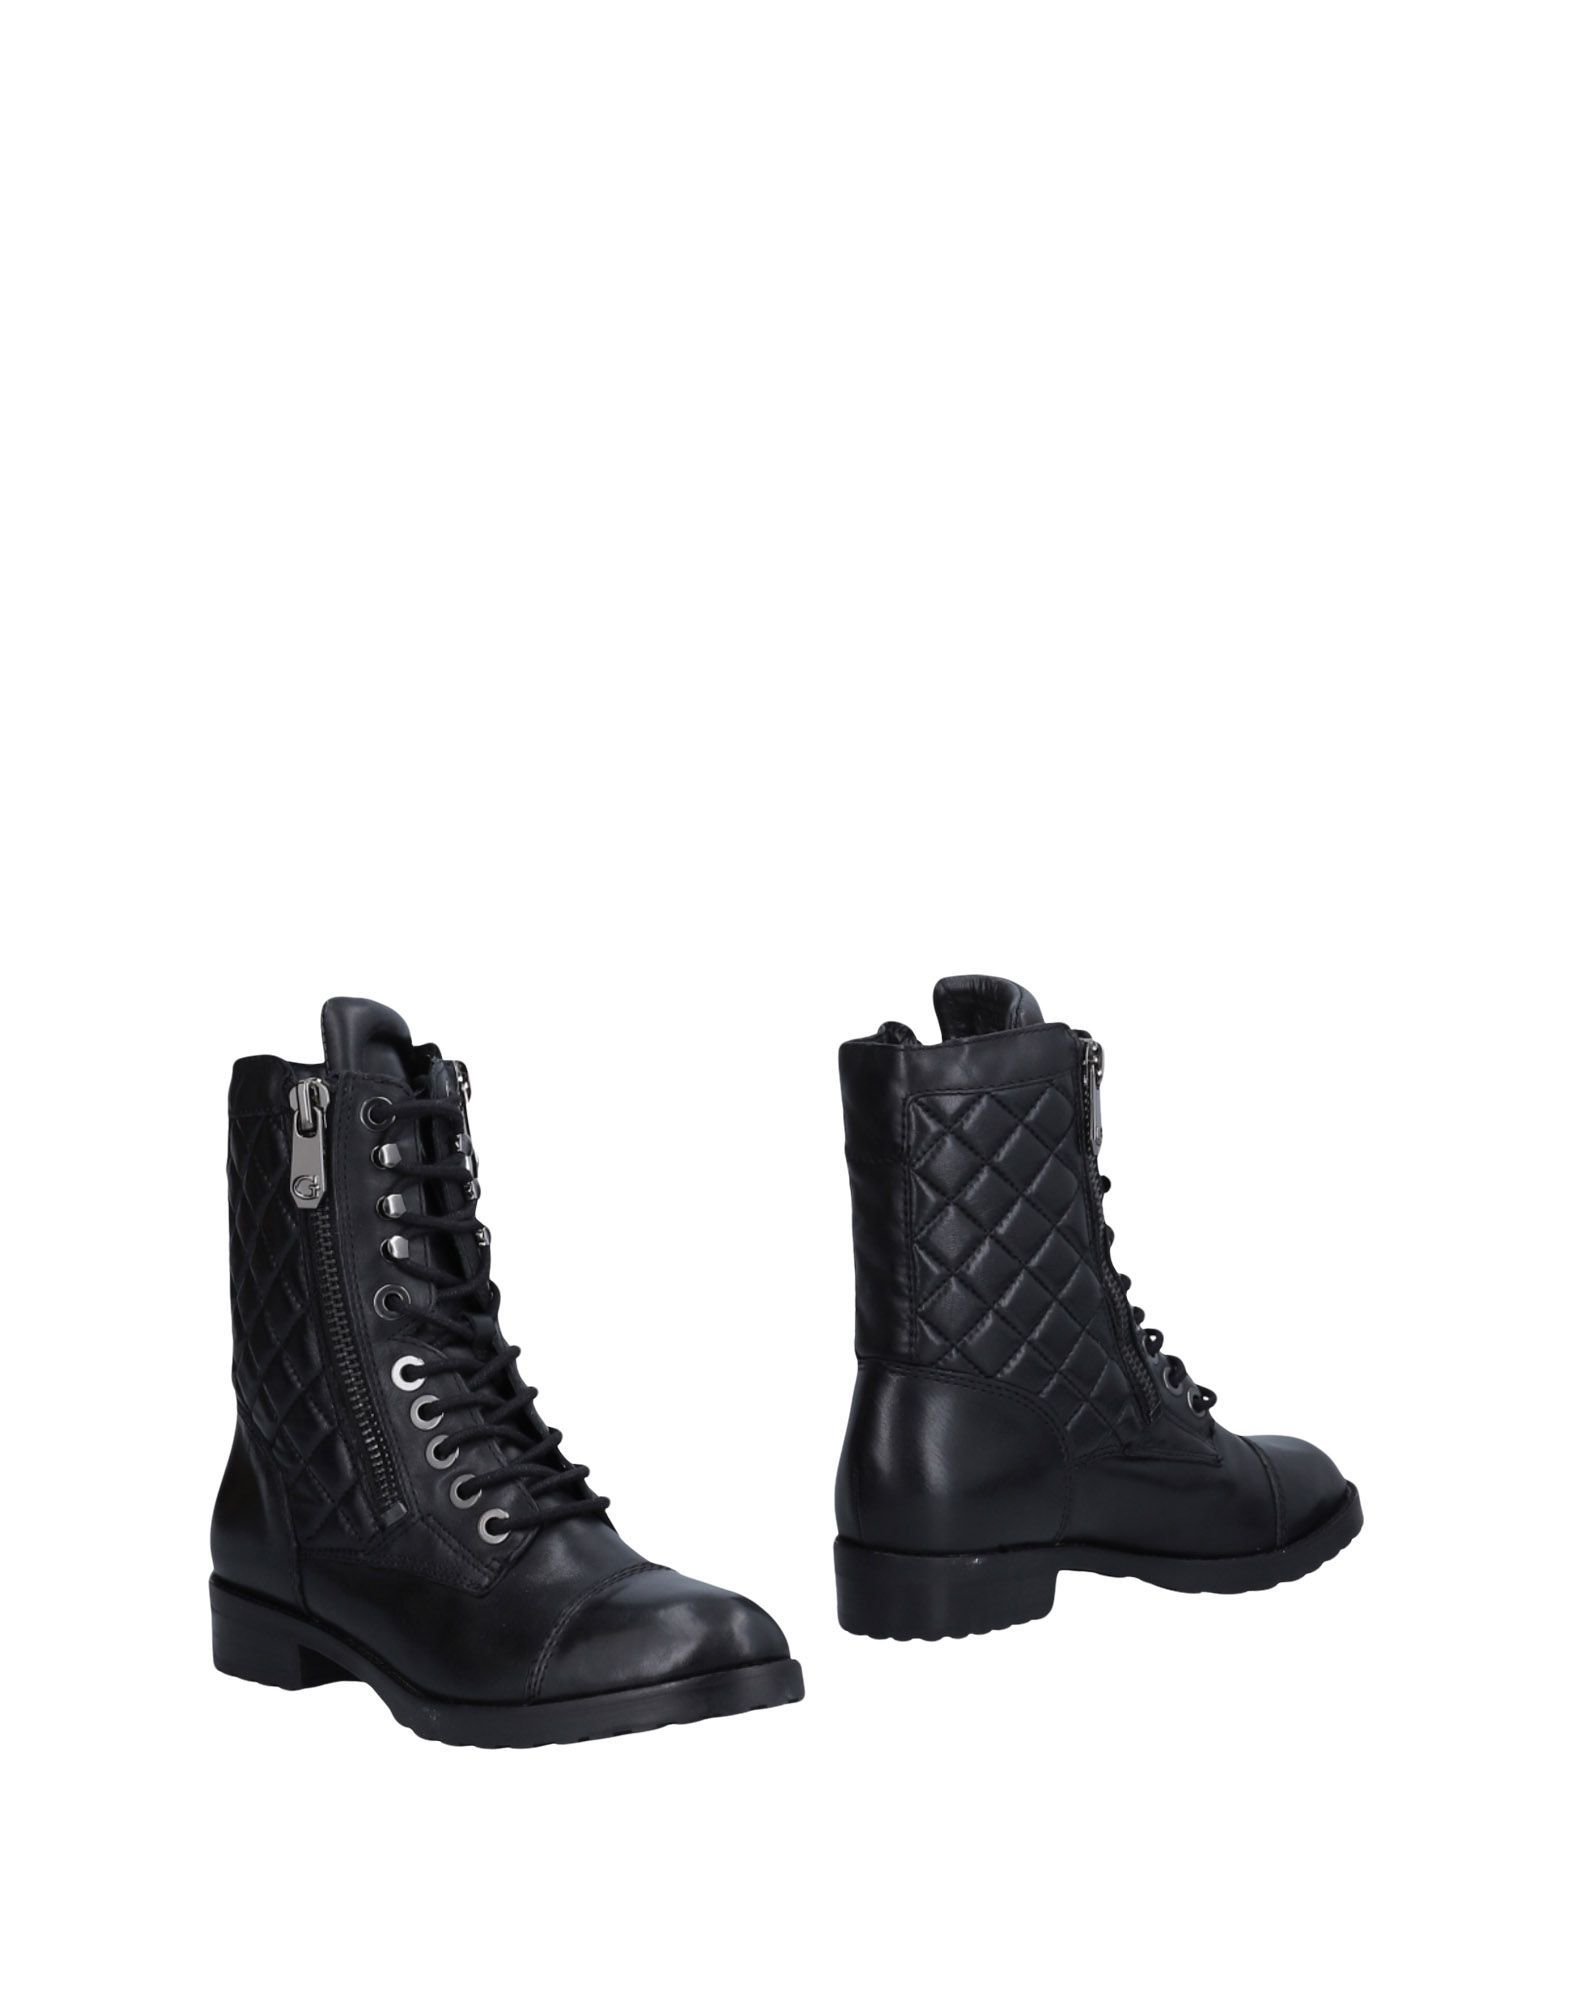 GUESS Ankle boots | YOOX (US)